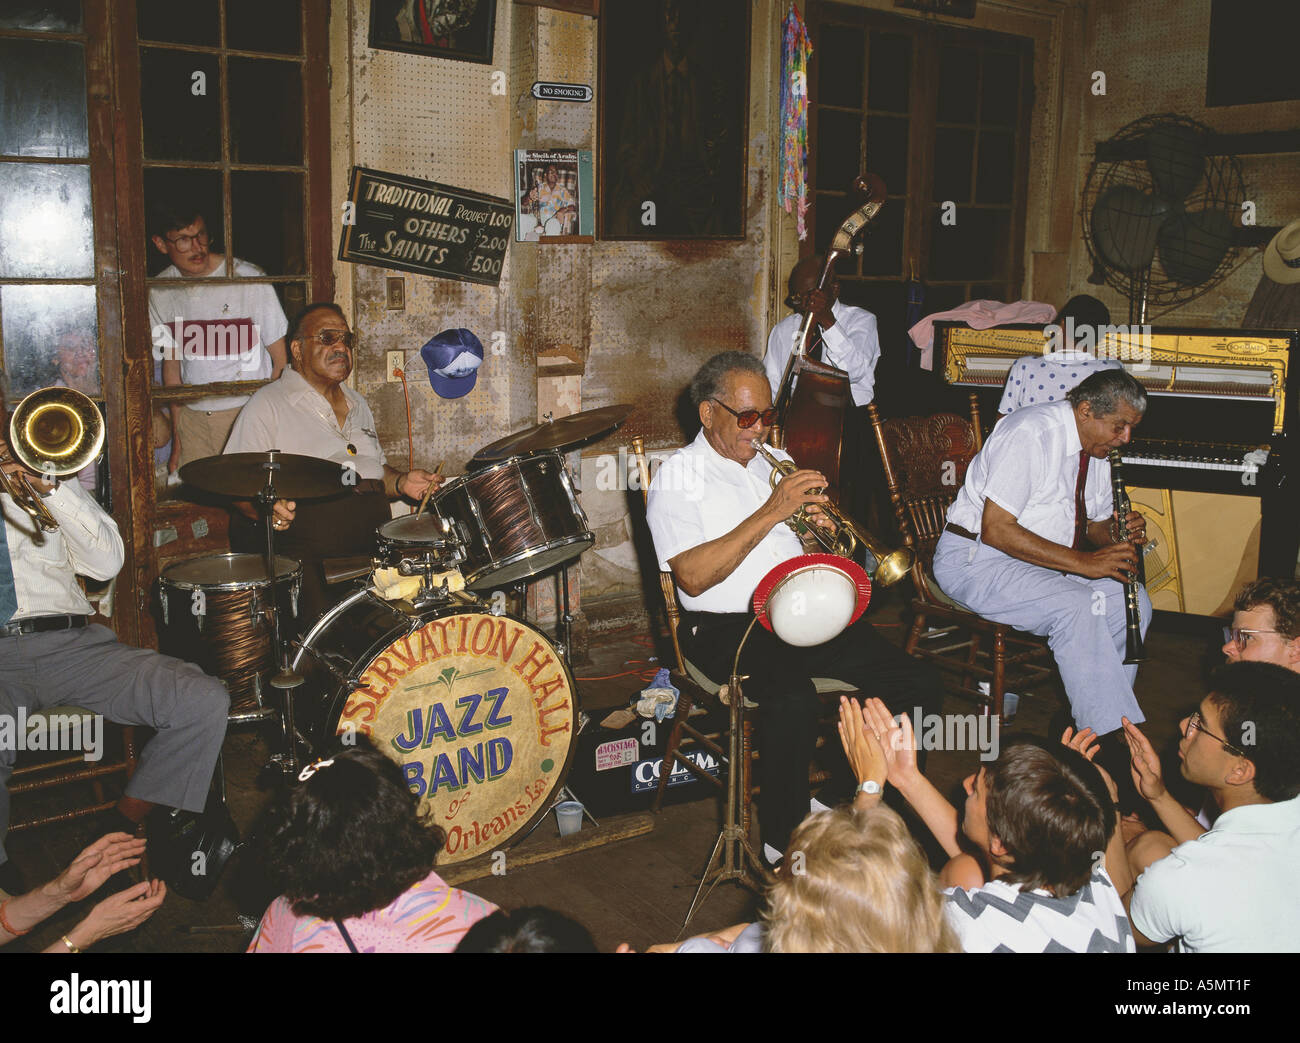 Jazz band playing at historic Preservation Hall on Bourbon Street New Orleans Louisiana USA Stock Photo